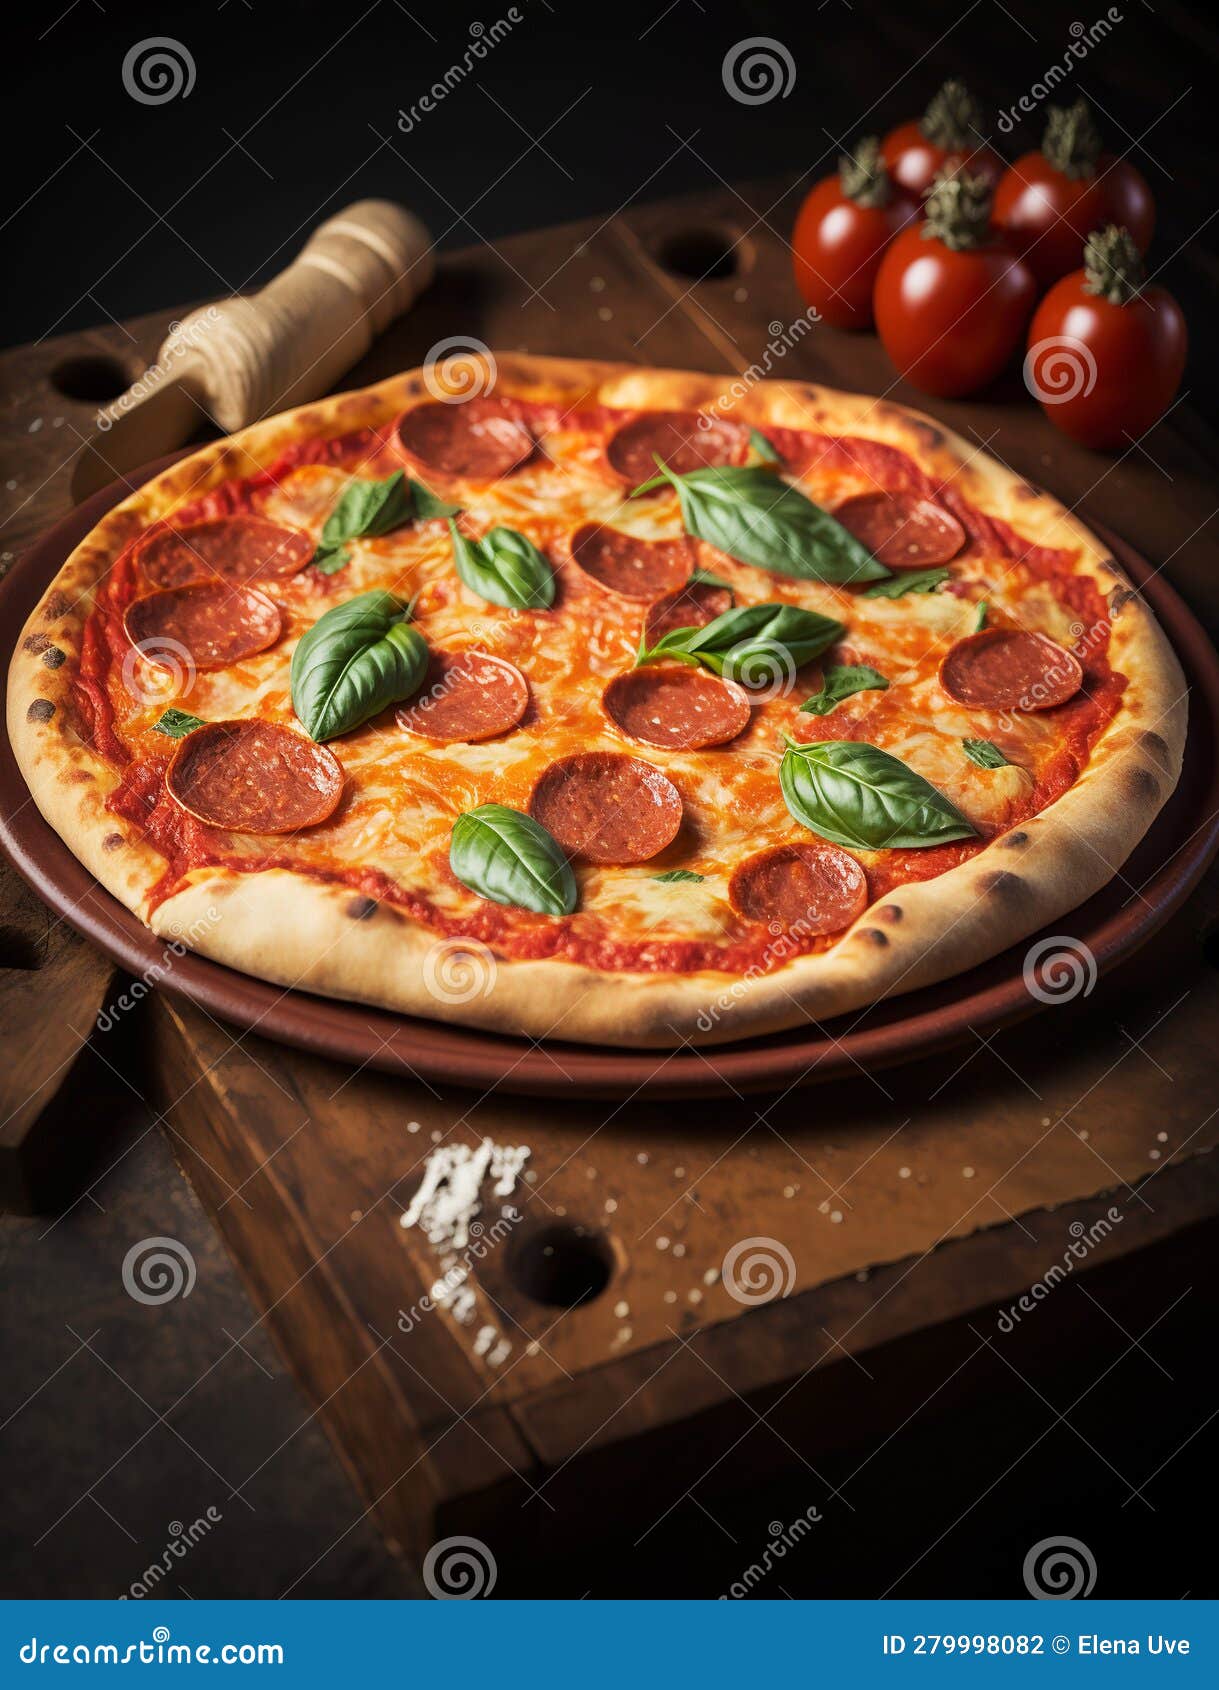 gourmet pizza with pepperoni and albahaca. italian food.